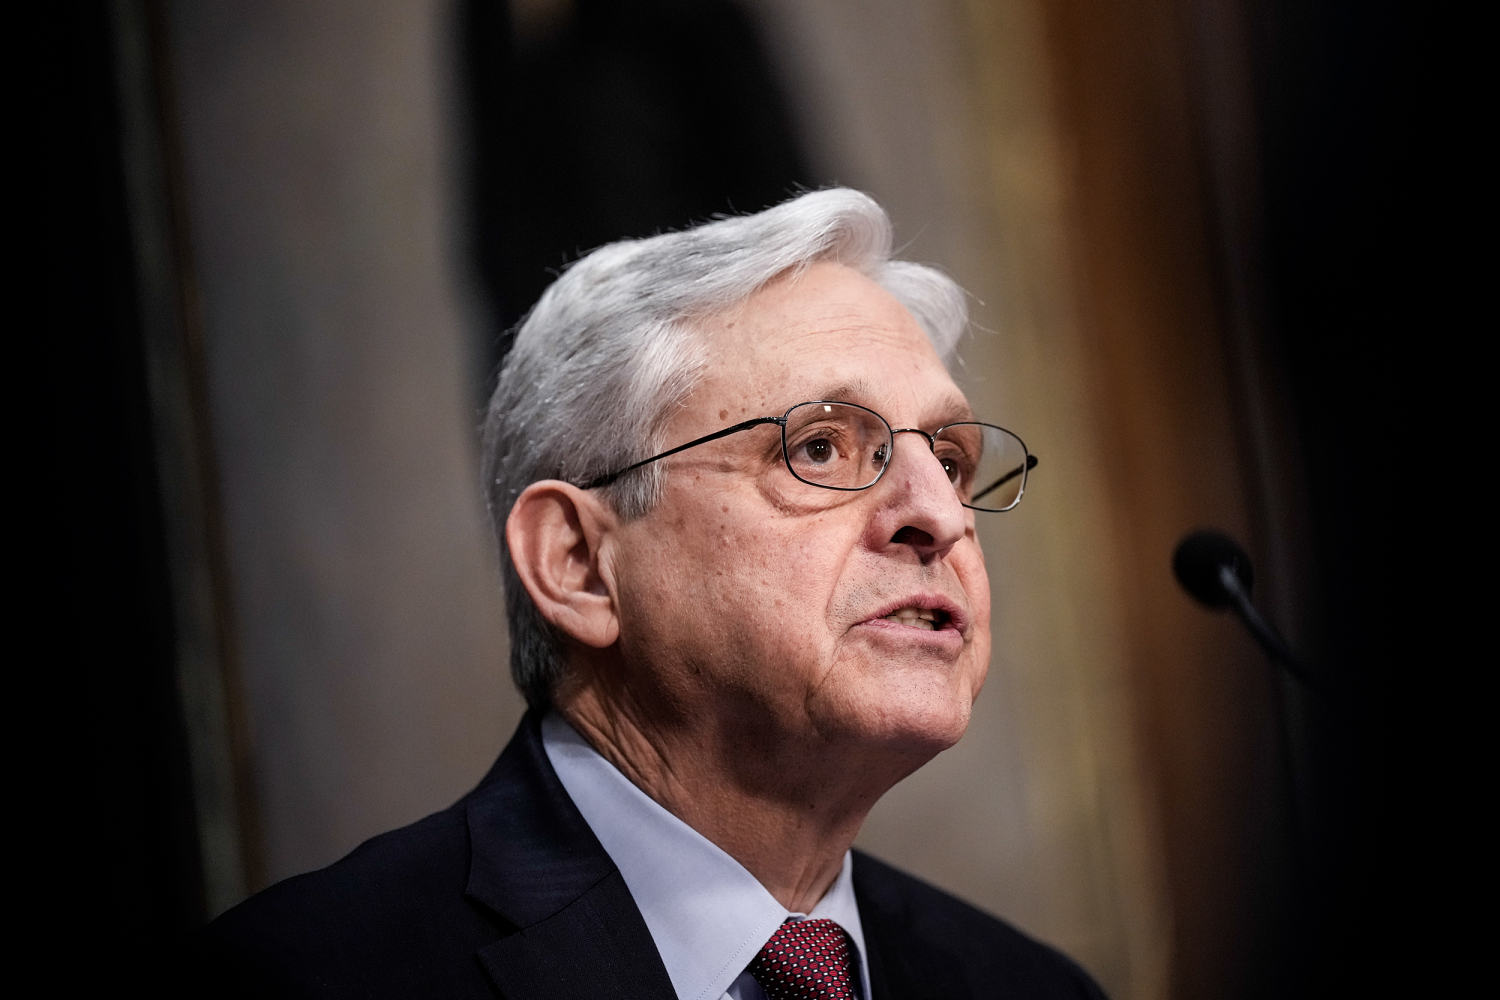 Merrick Garland isn’t to blame for delays in Trump’s election interference case